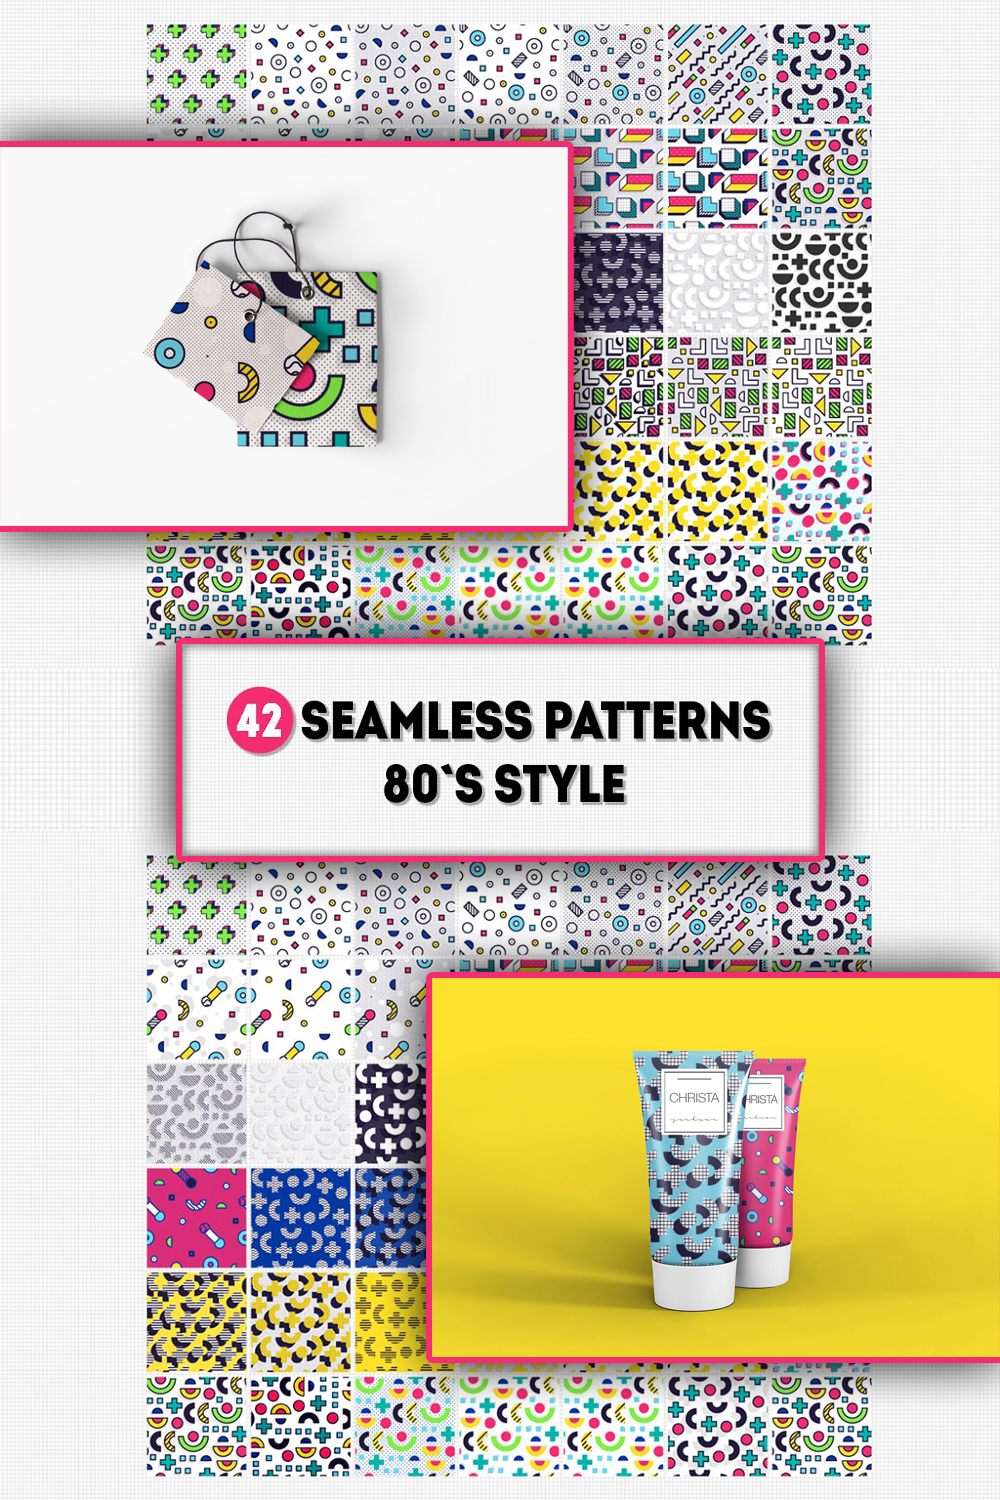 42 seamless patterns in 80s style of pinterest.